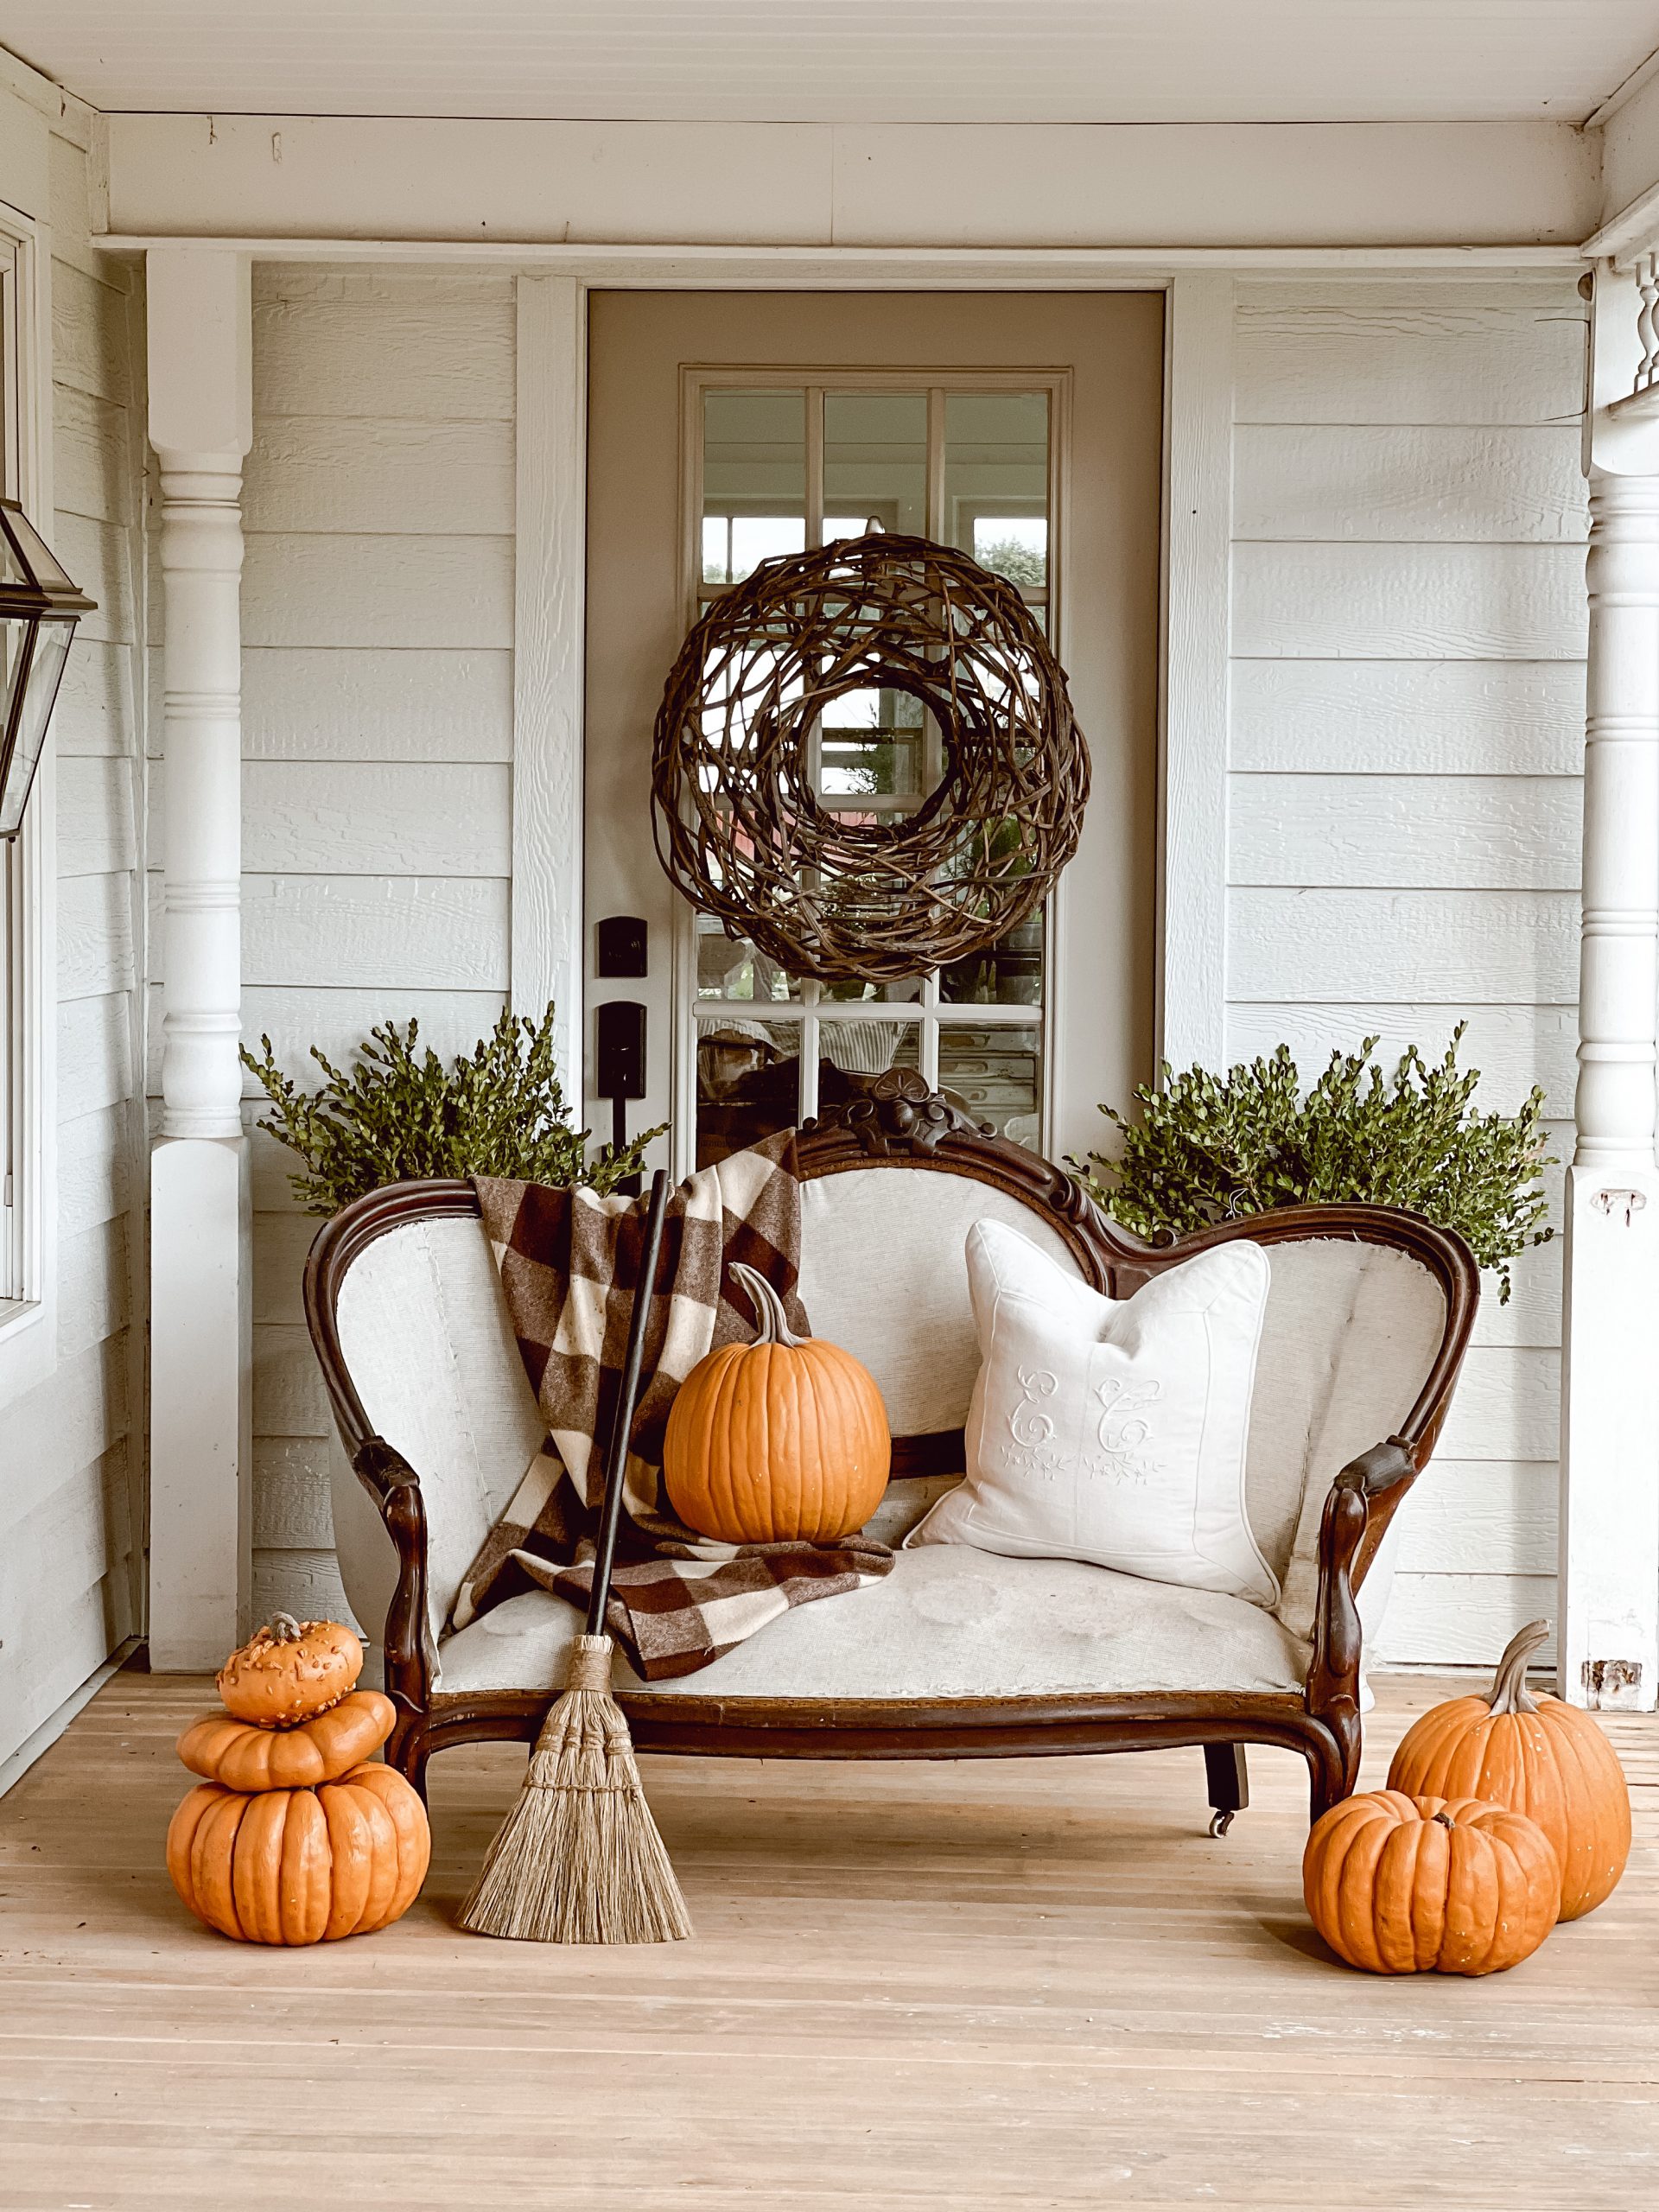 The Budget Friendly Approach to Updating your Porch